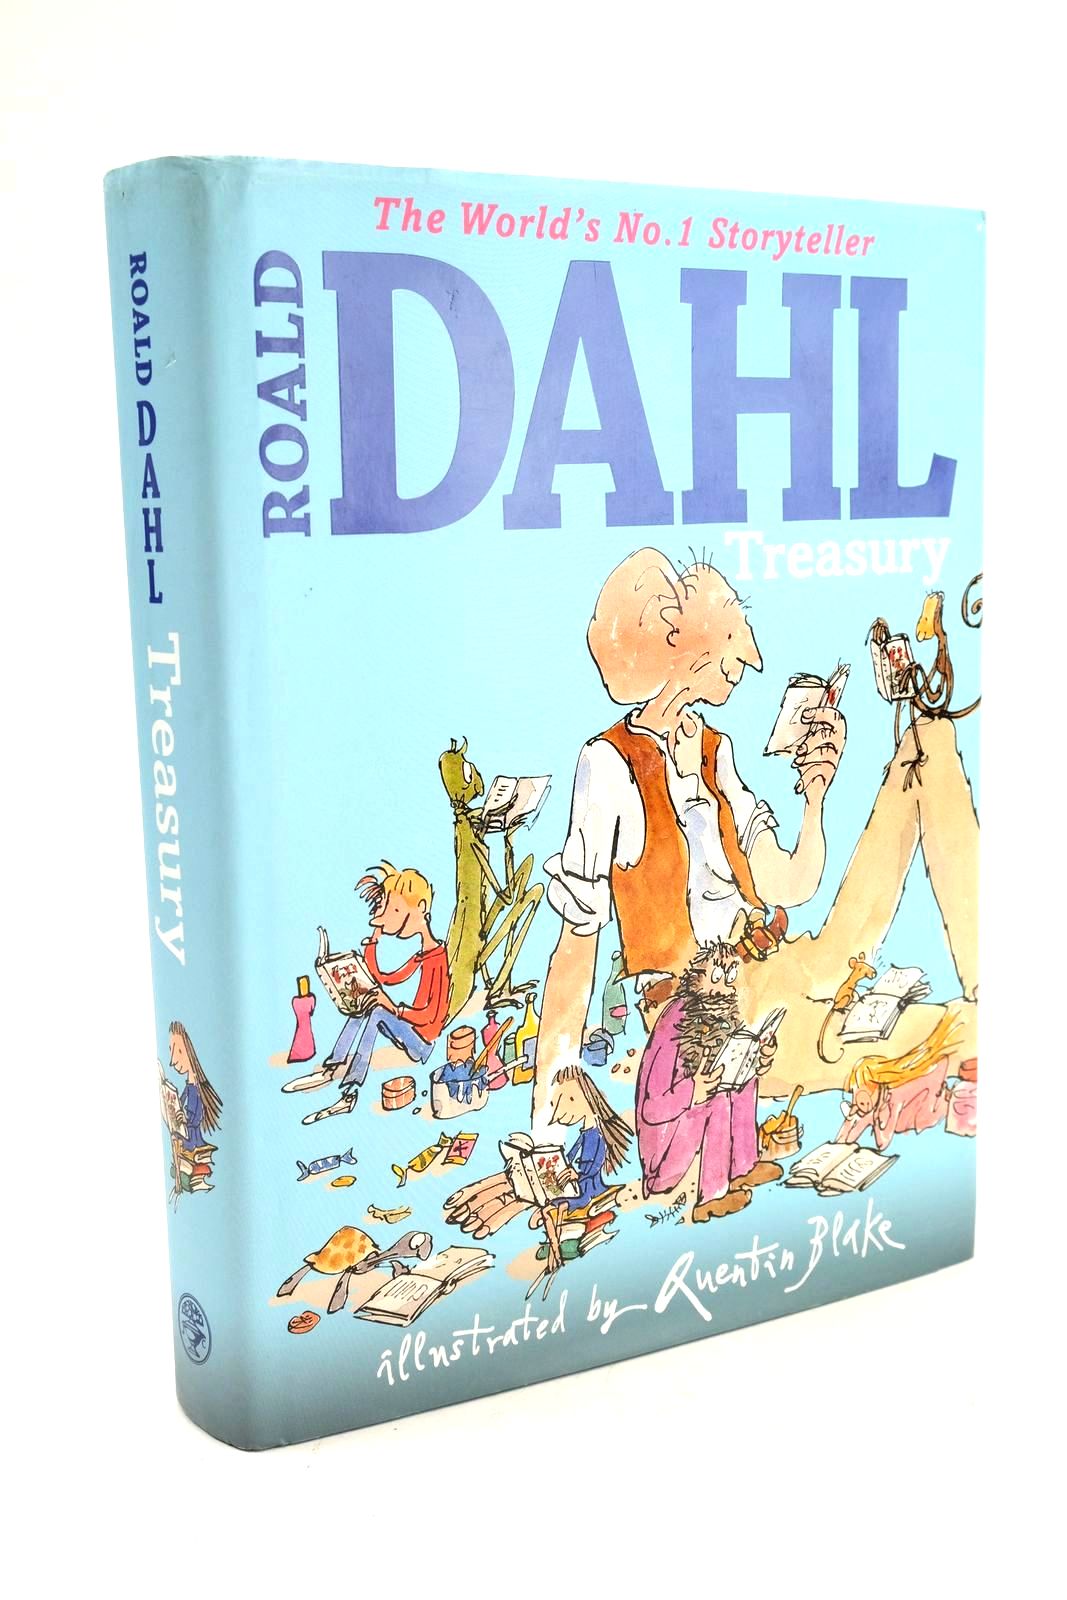 Photo of THE ROALD DAHL TREASURY written by Dahl, Roald illustrated by Blake, Quentin Benson, Patrick Briggs, Raymond et al., published by Jonathan Cape (STOCK CODE: 1325182)  for sale by Stella & Rose's Books